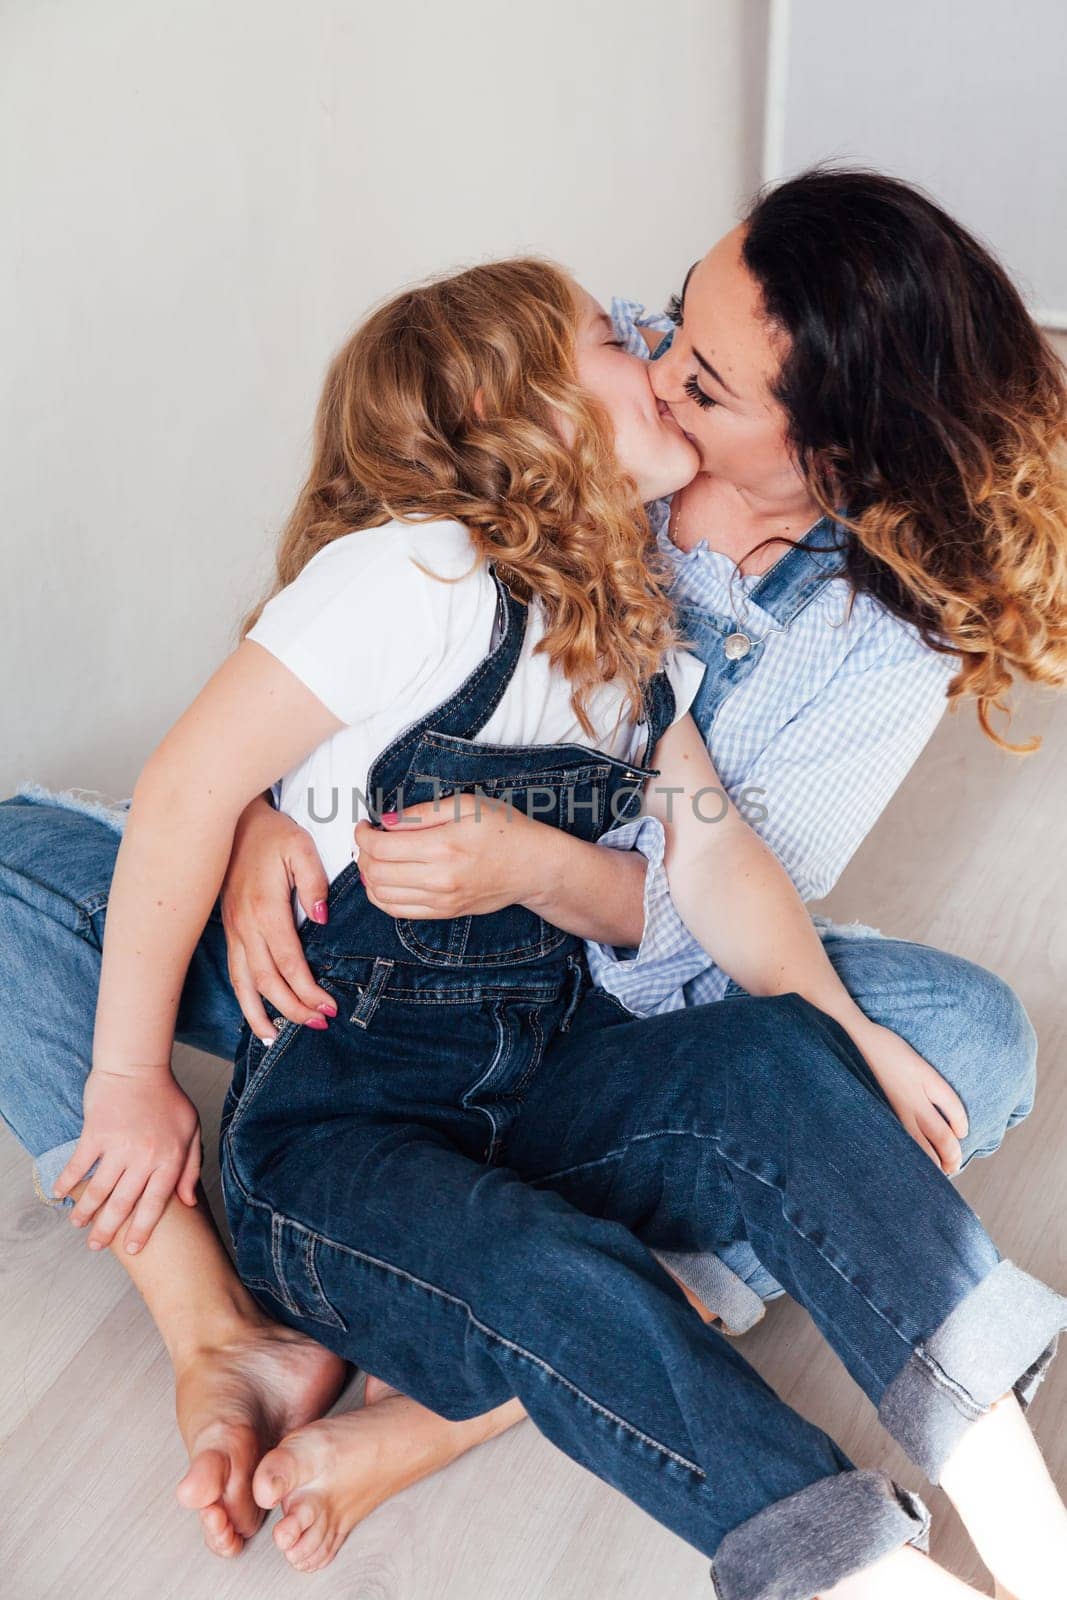 Mom and daughter in jeans sit together cuddling by Simakov